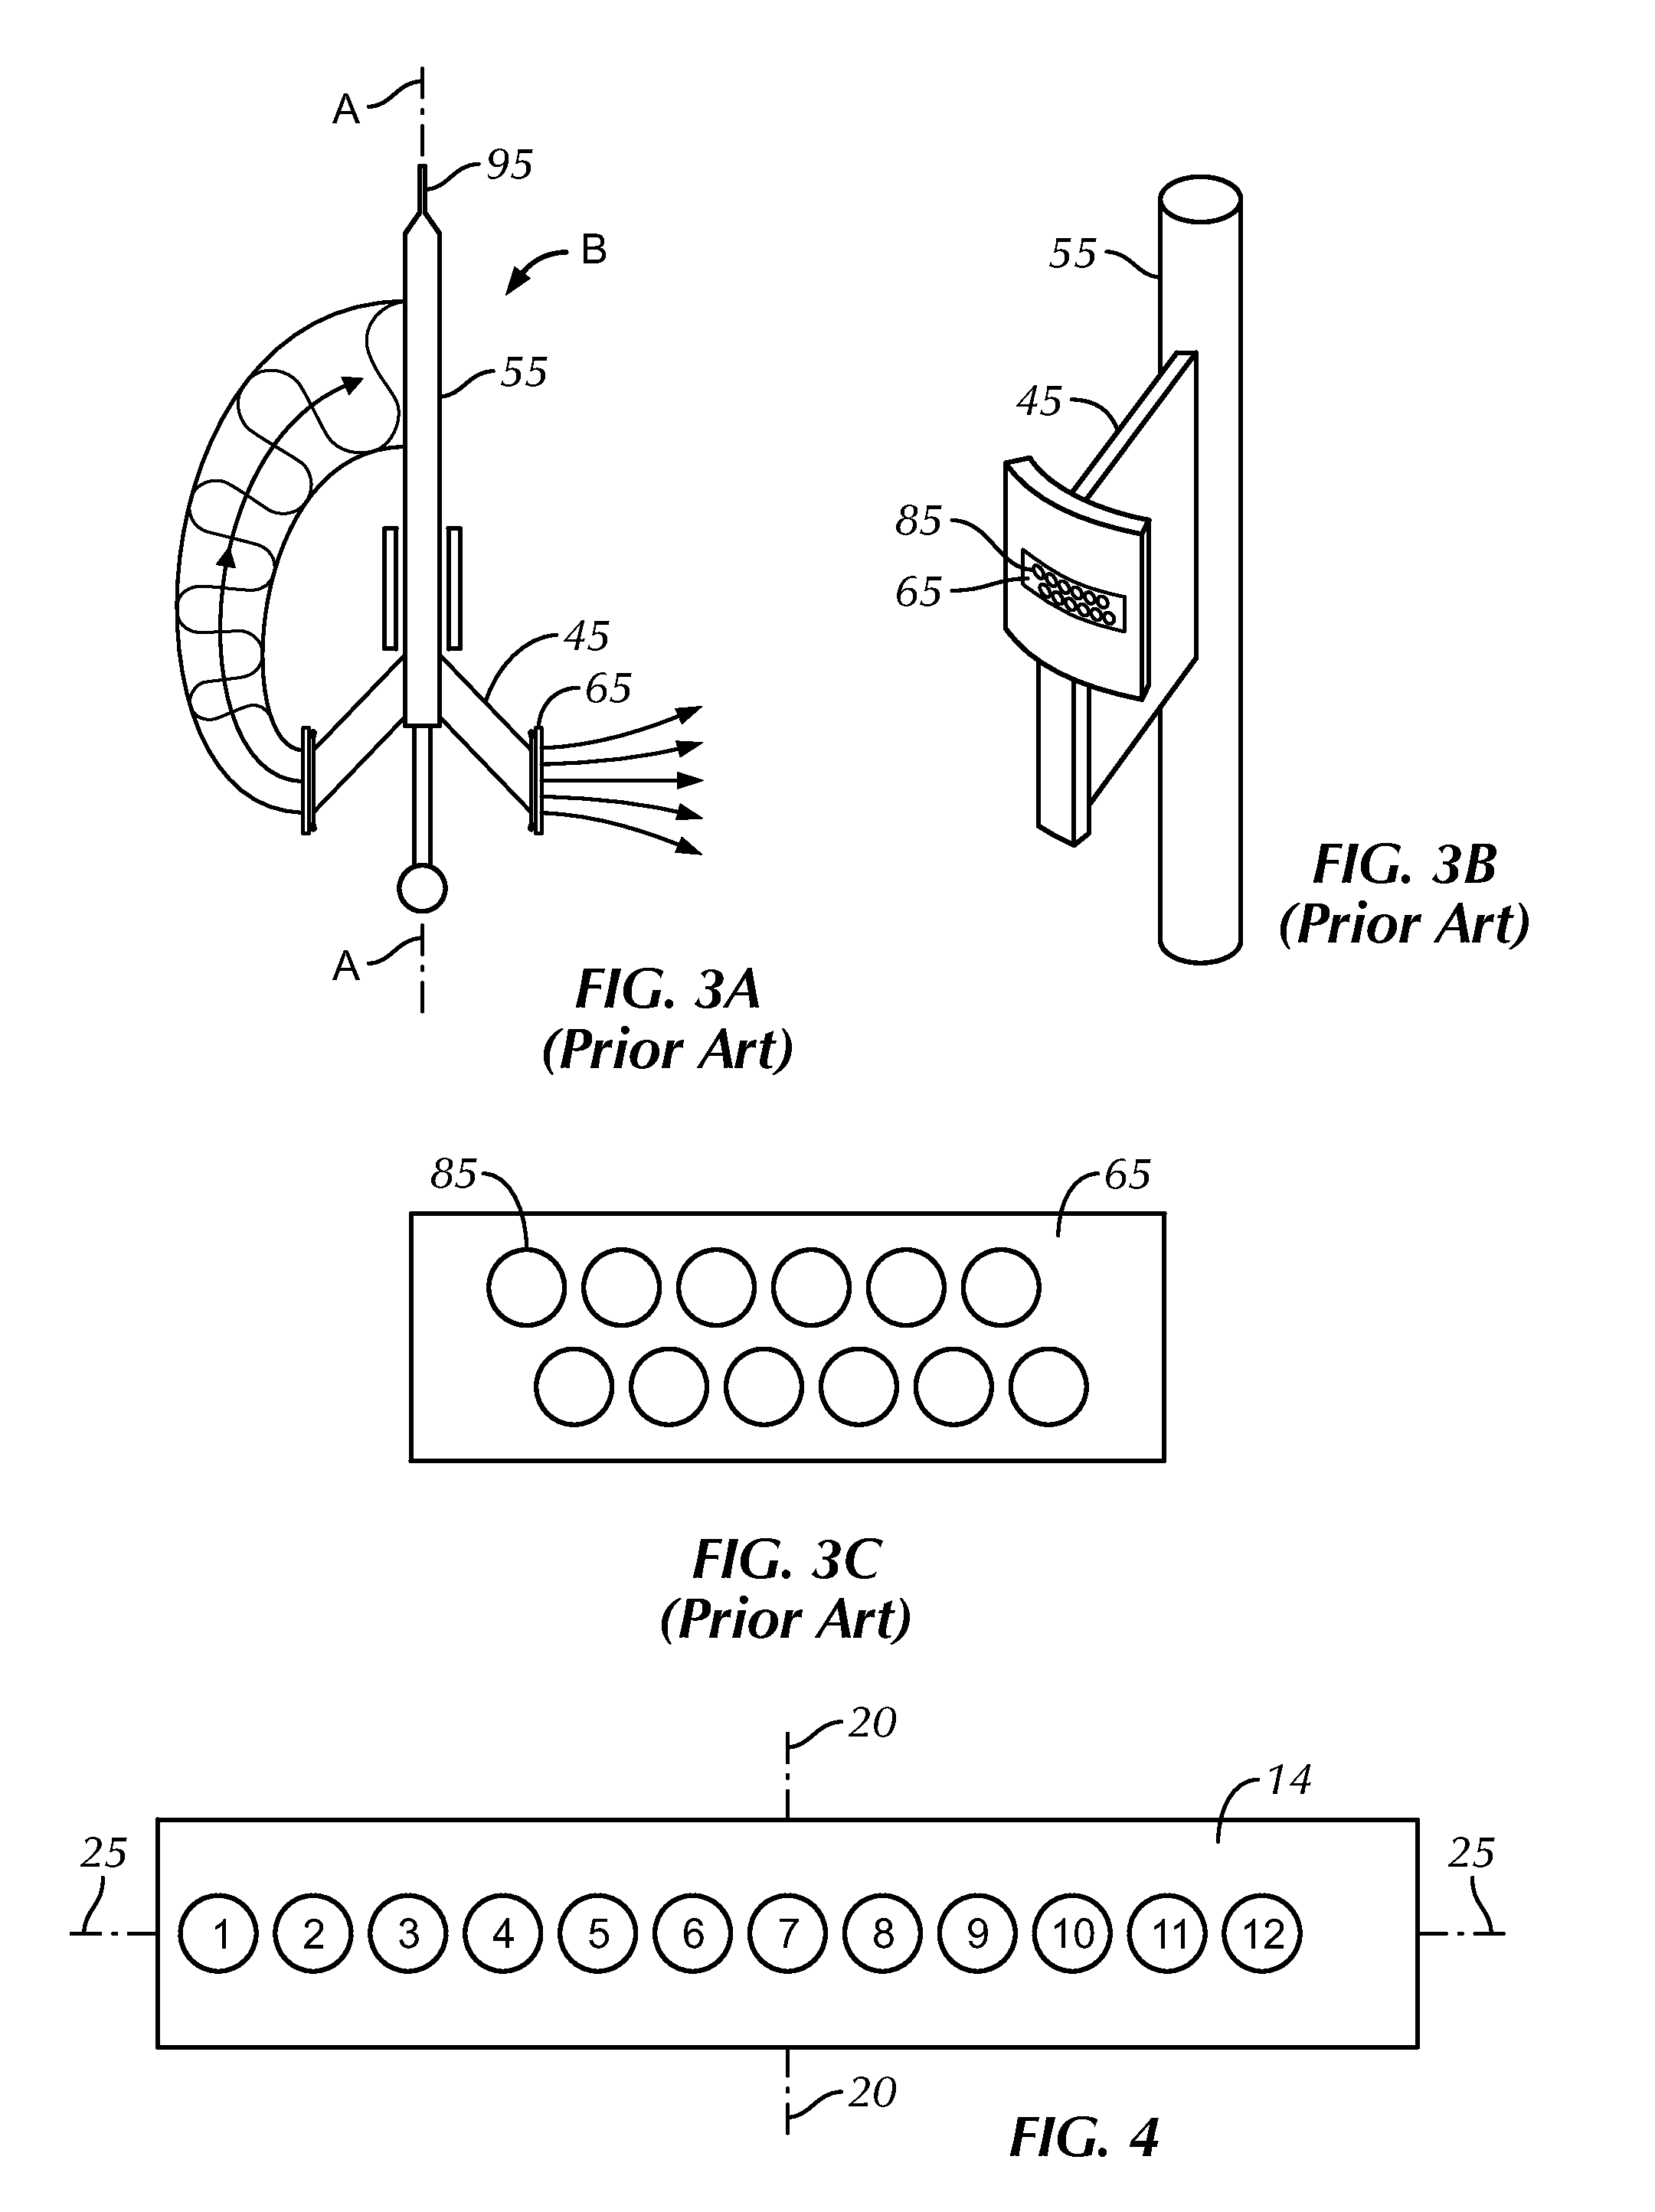 Method and Apparatus for Detection and Quantification of Borehole Standoff